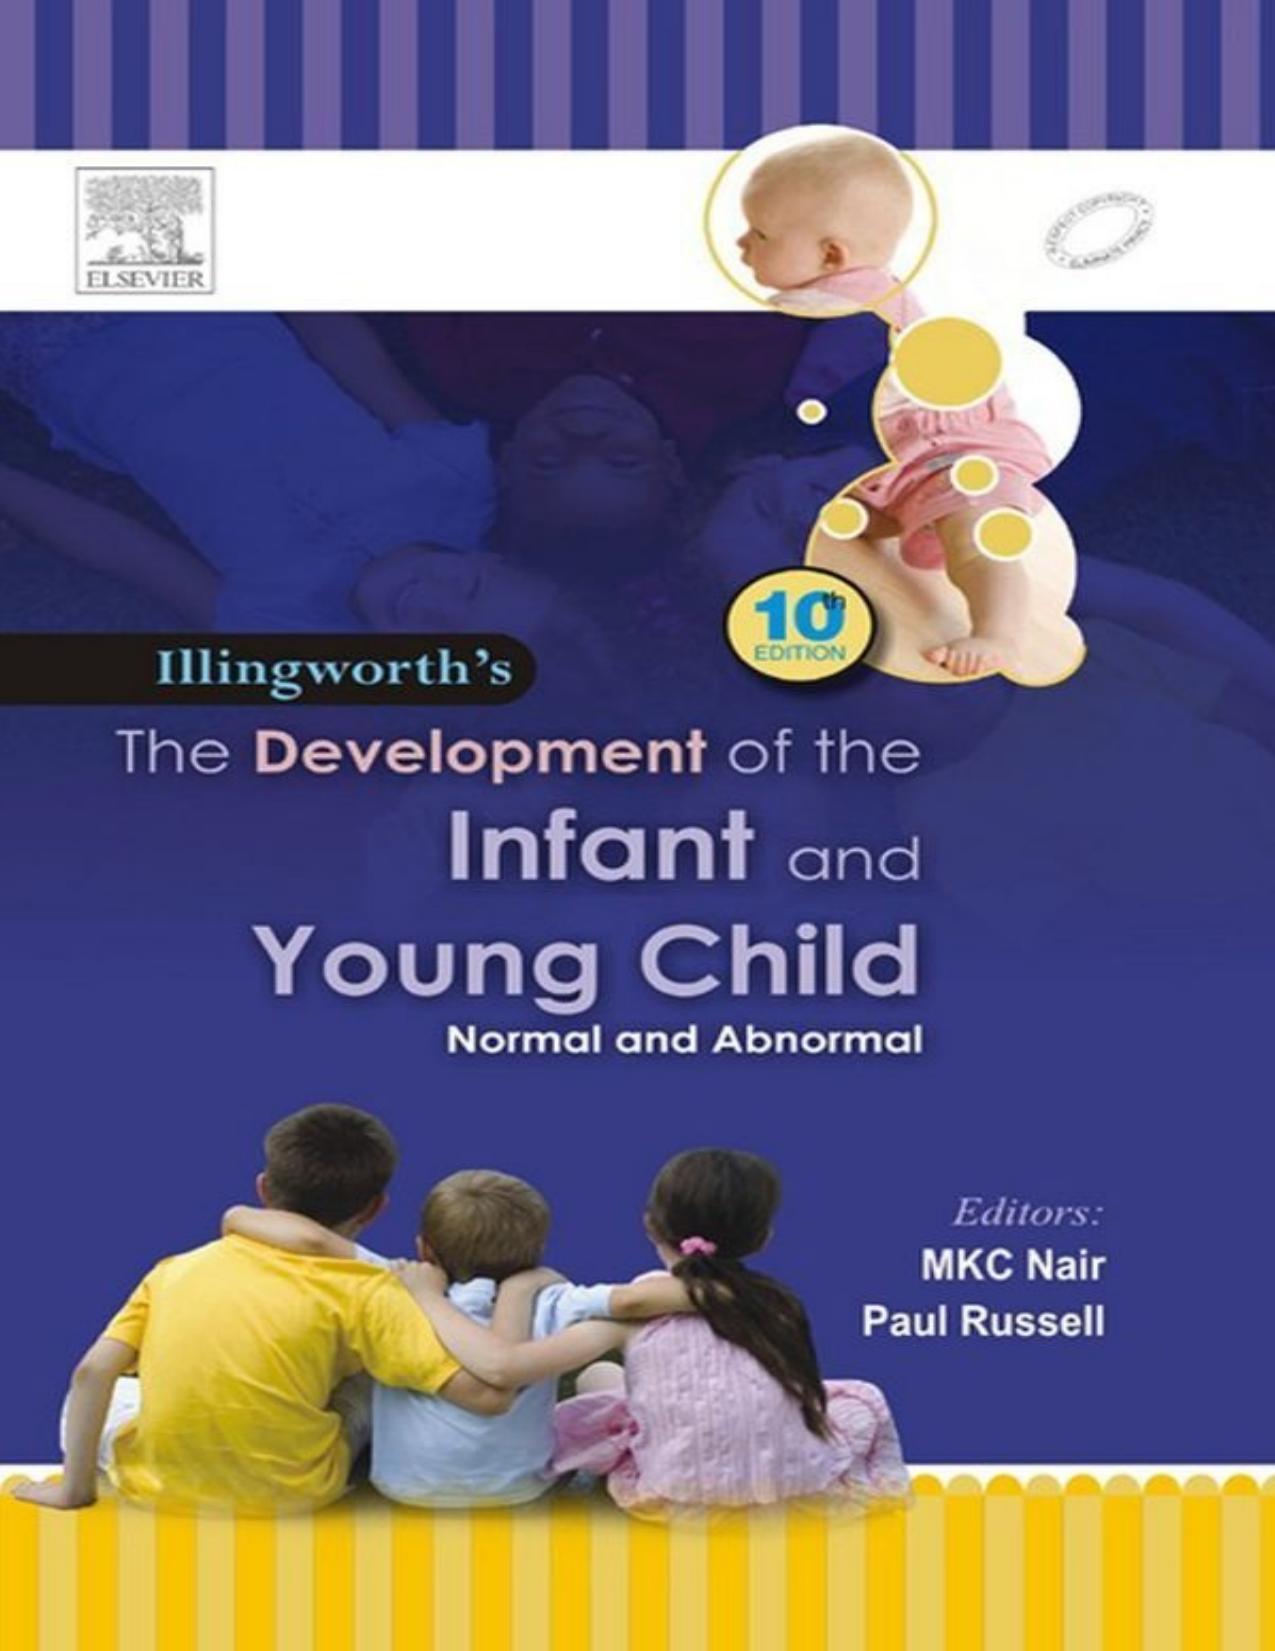 The Development of the Infant and the Young Child: Normal and Abnormal - PDFDrive.com